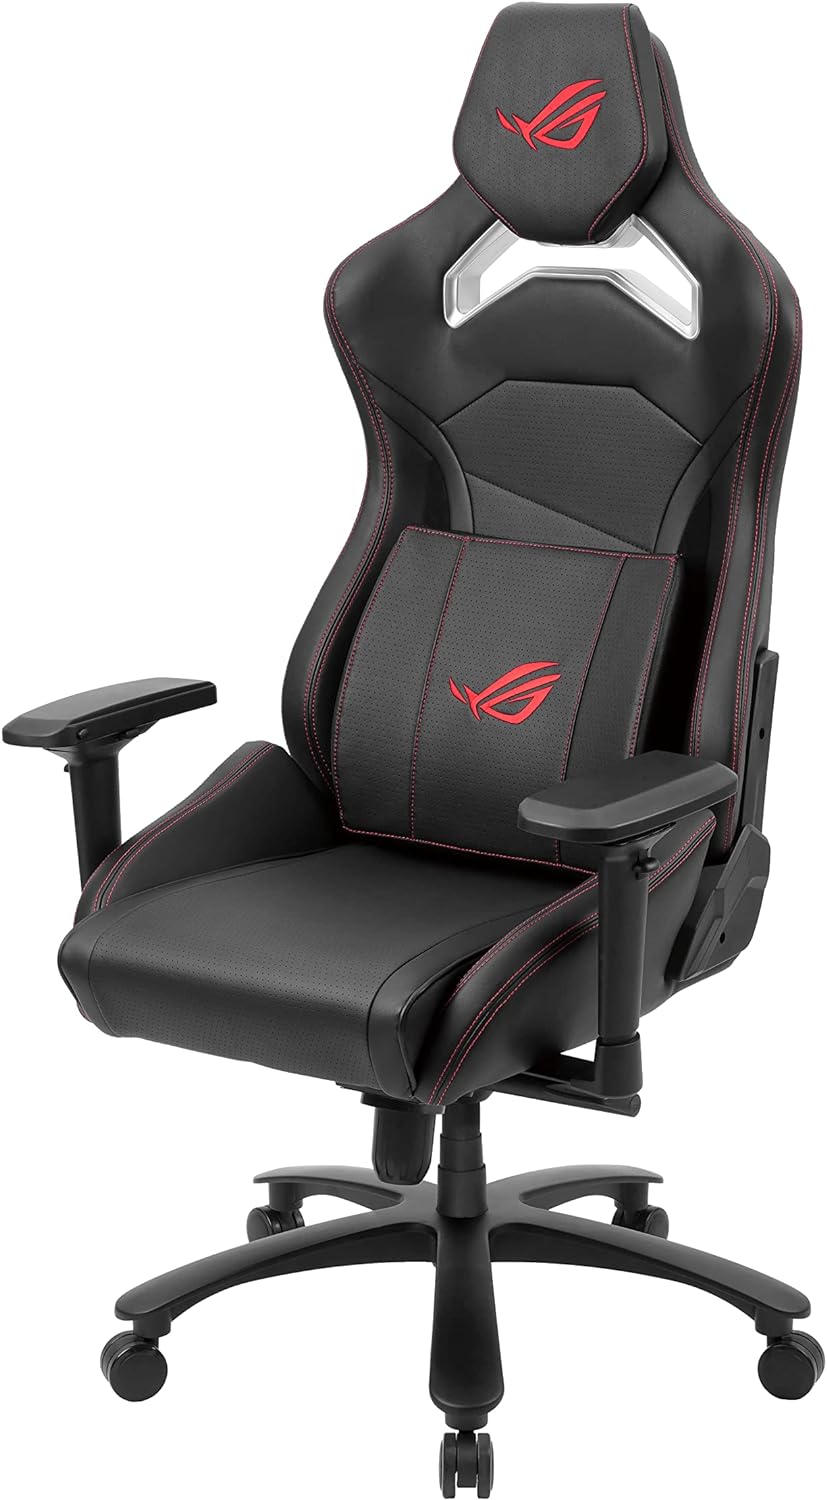 Ergonomic ASUS ROG Chariot Core Gaming Chair with memory foam lumbar cushion for support. 4718017322782